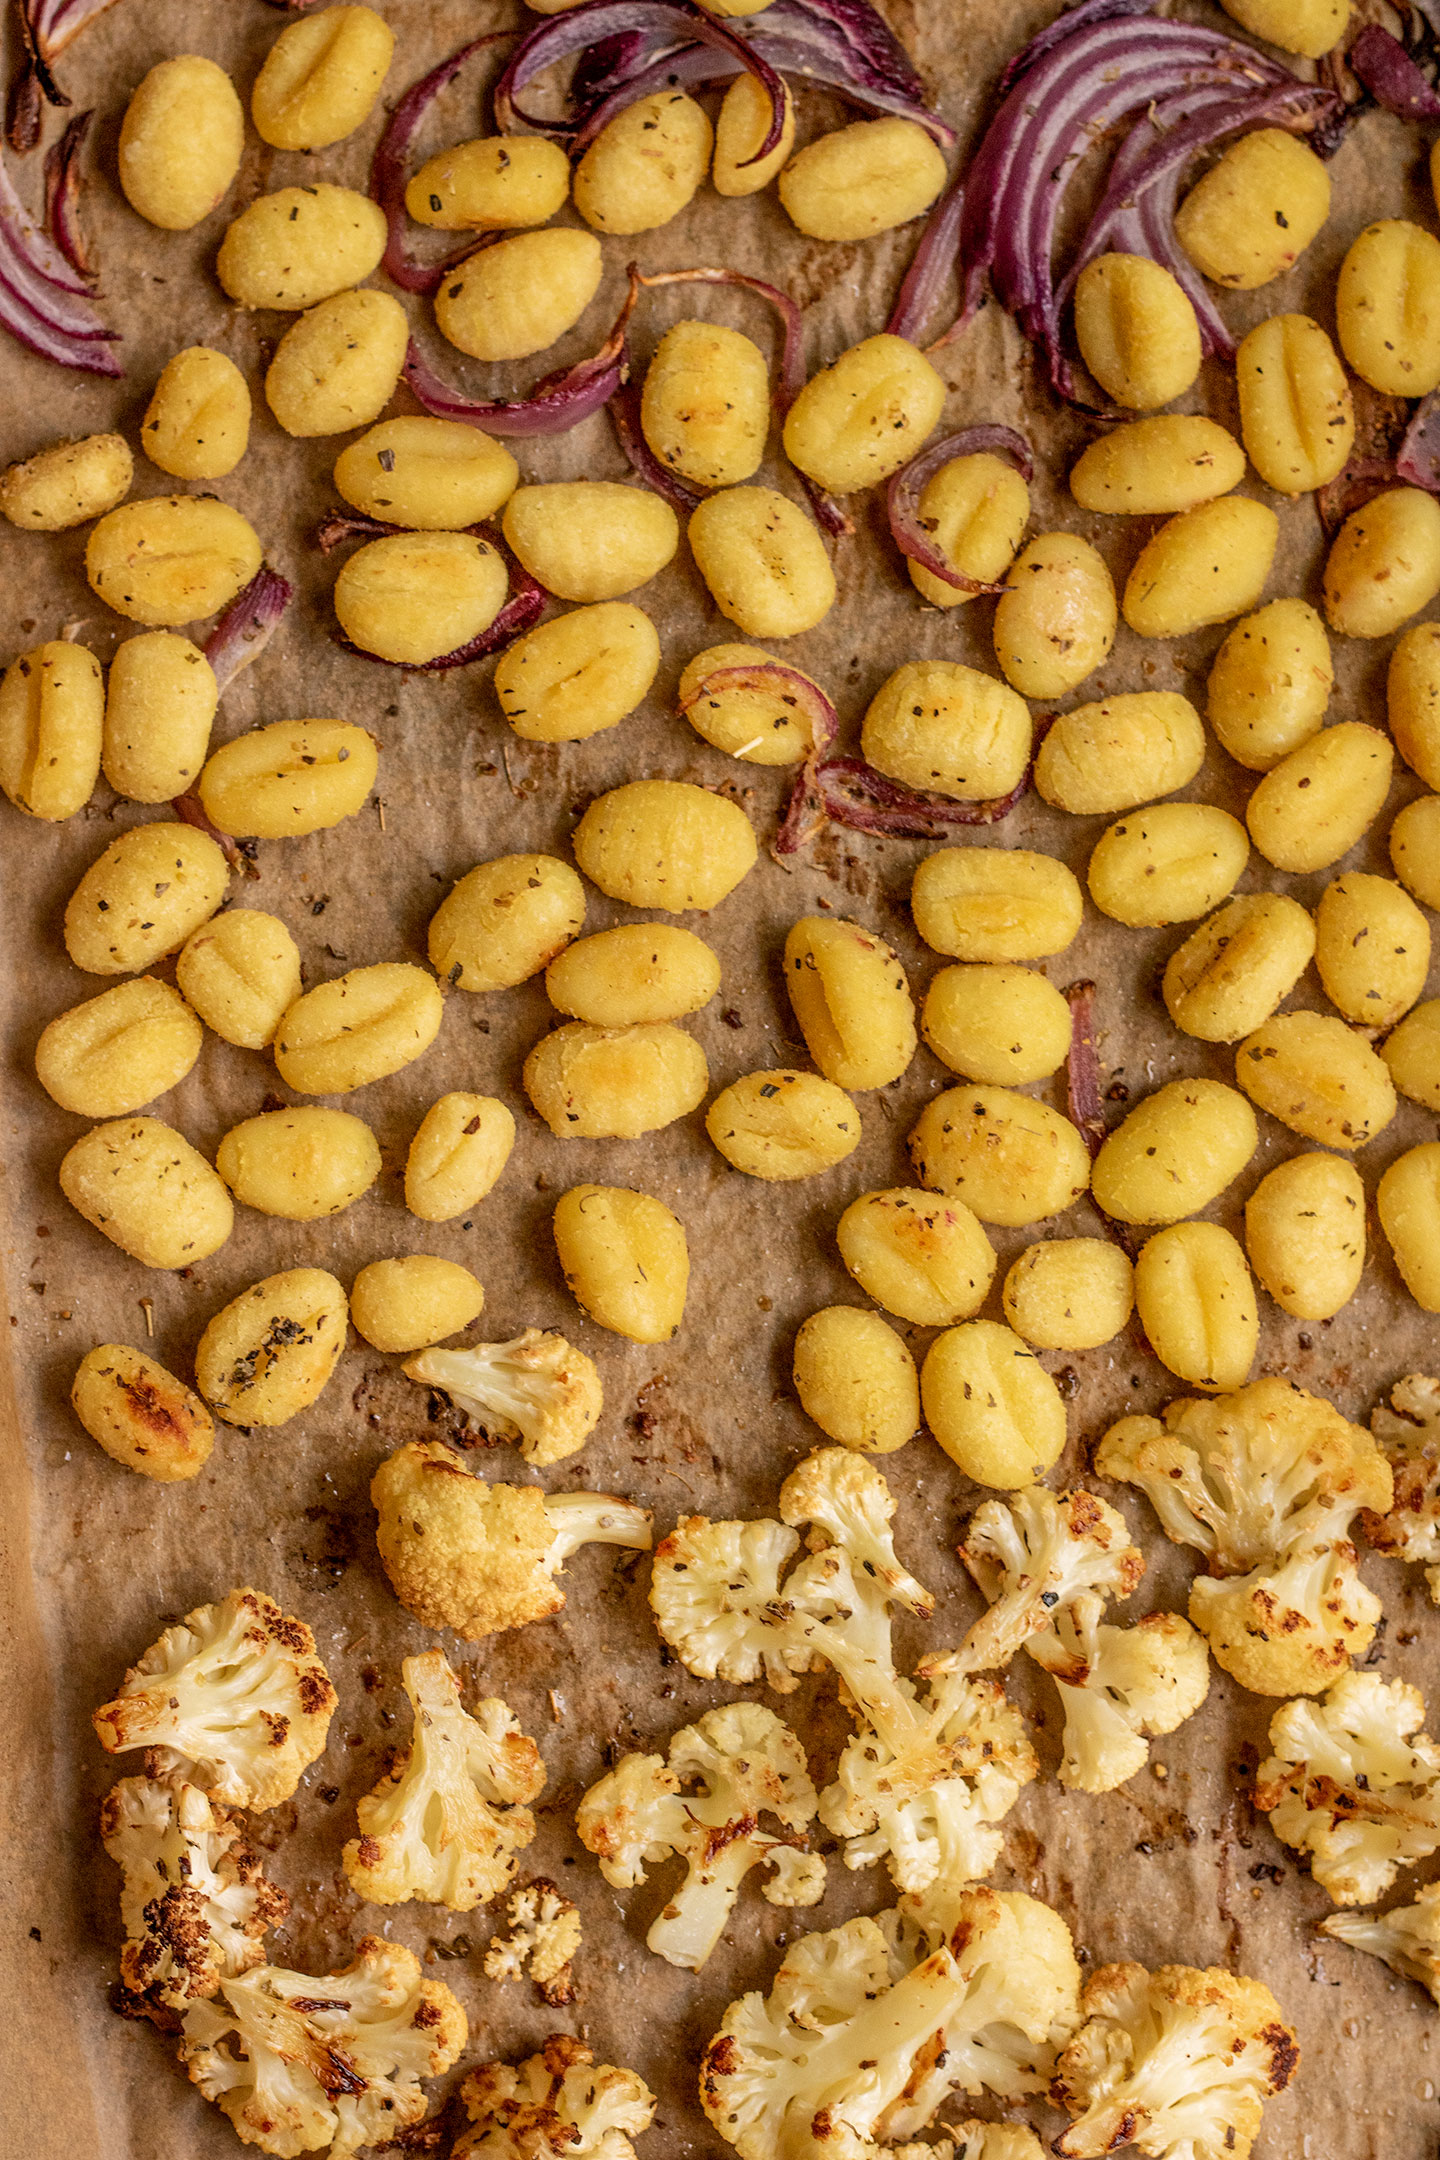 Sheet pan with roasted gnocchi, cauliflower and onions.